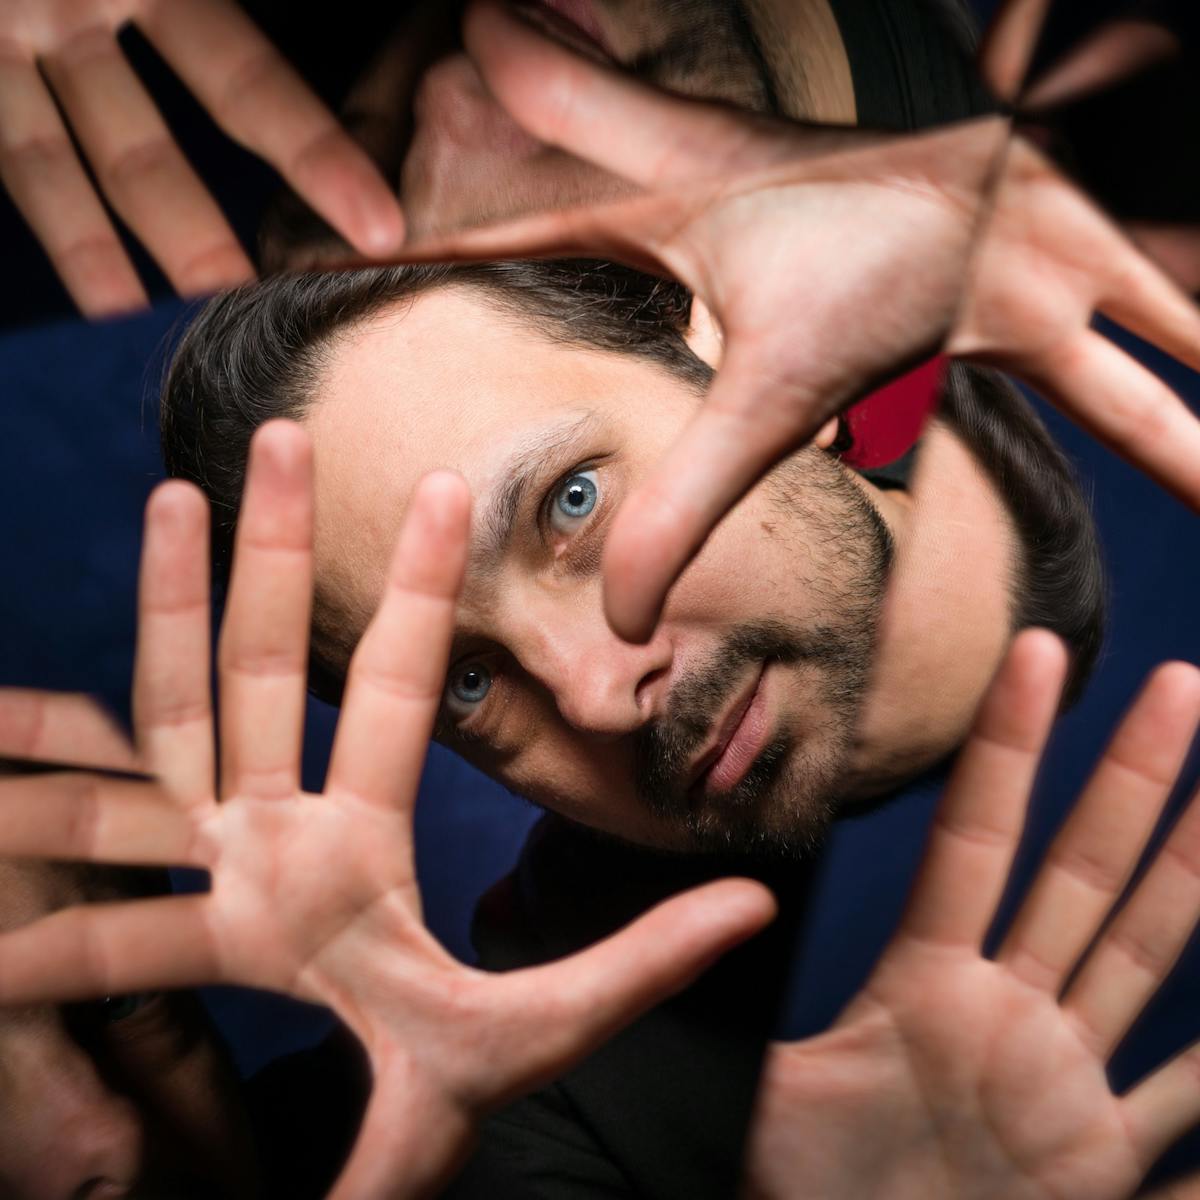 Photograph through a kaleidescope of the head of a man. His hands are held up in front of his face, with fingers outstretched, framing has eye. The background is made up of blue and red fabric.